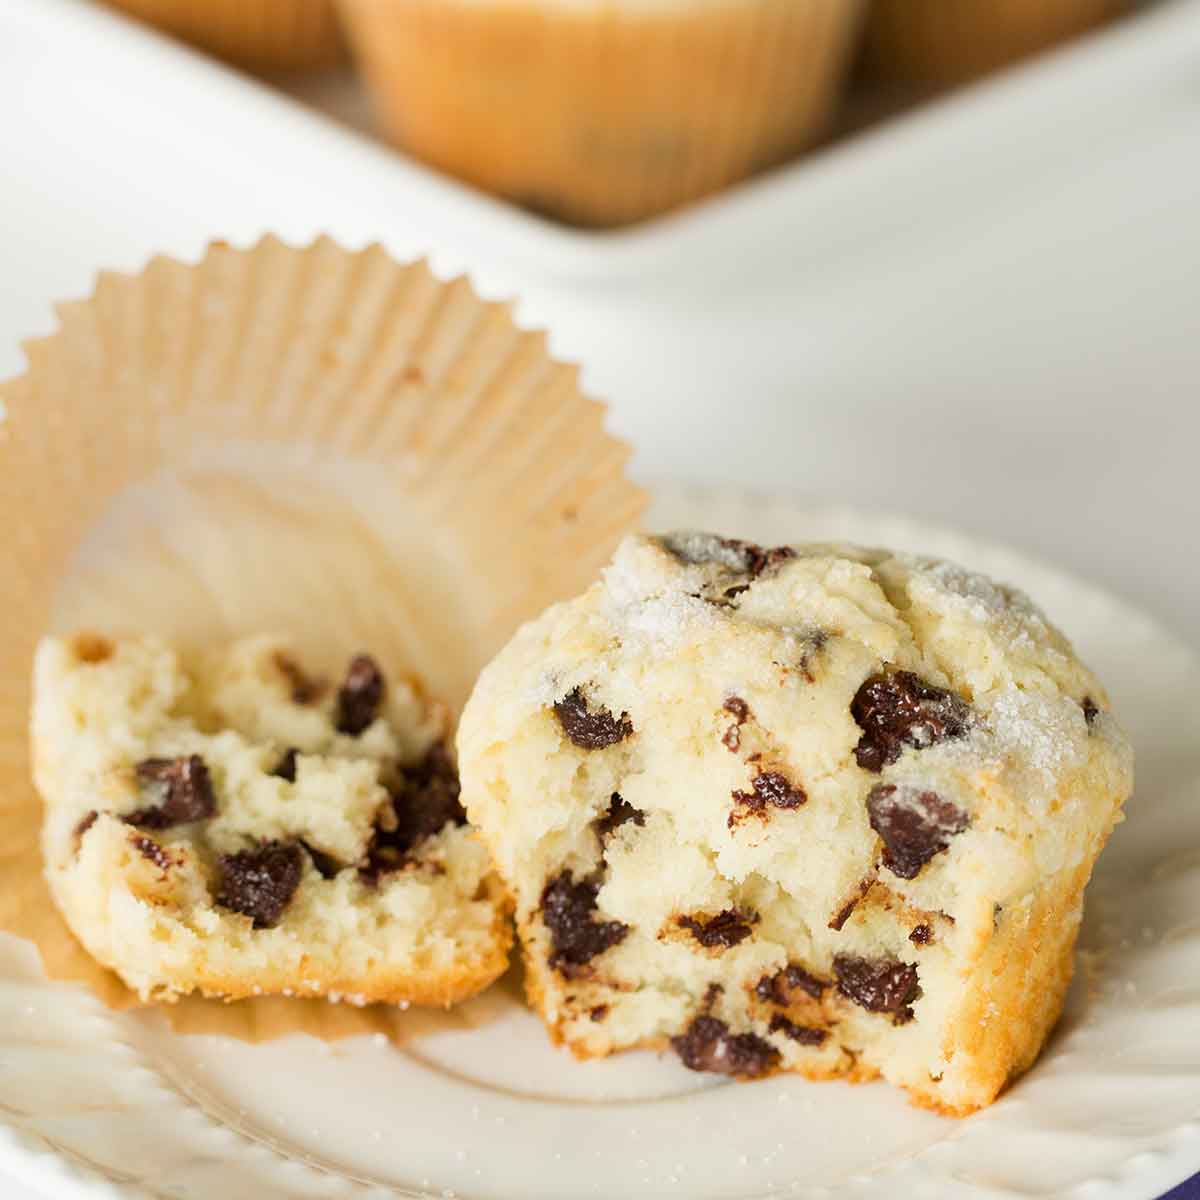 A chocolate chip muffins broken in half on a white plate with the liner on the plate.